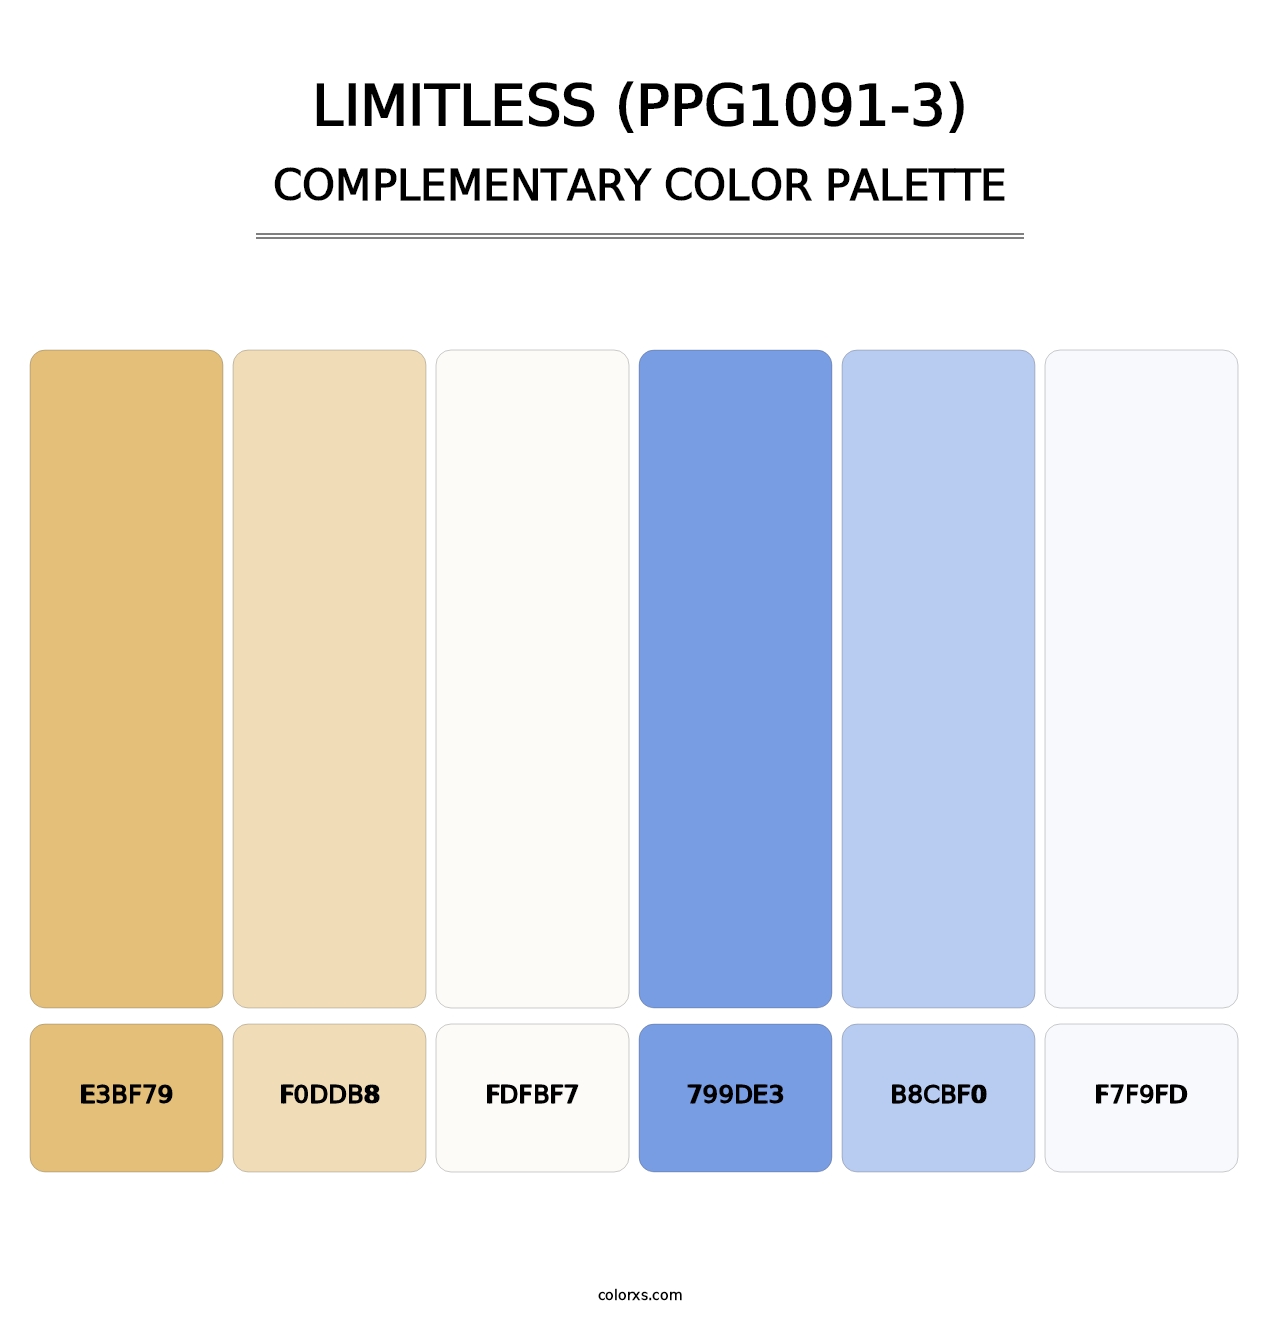 Limitless (PPG1091-3) - Complementary Color Palette